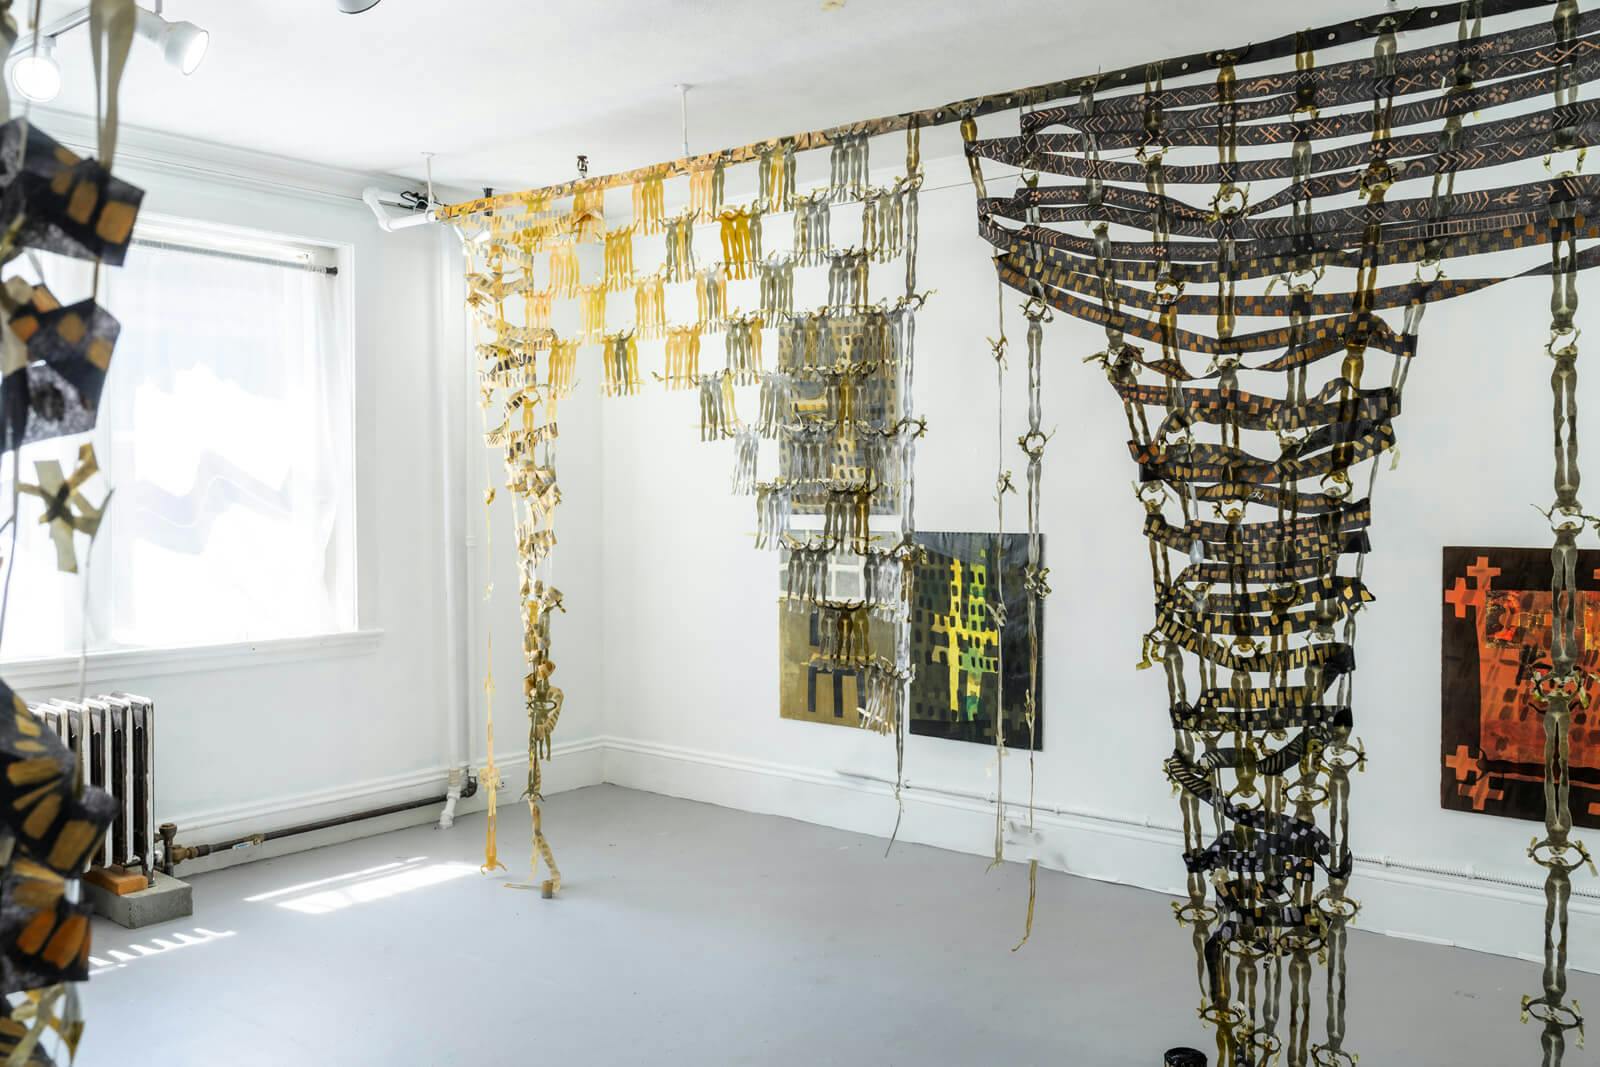 An installation features gold hangings suspended from the ceiling.